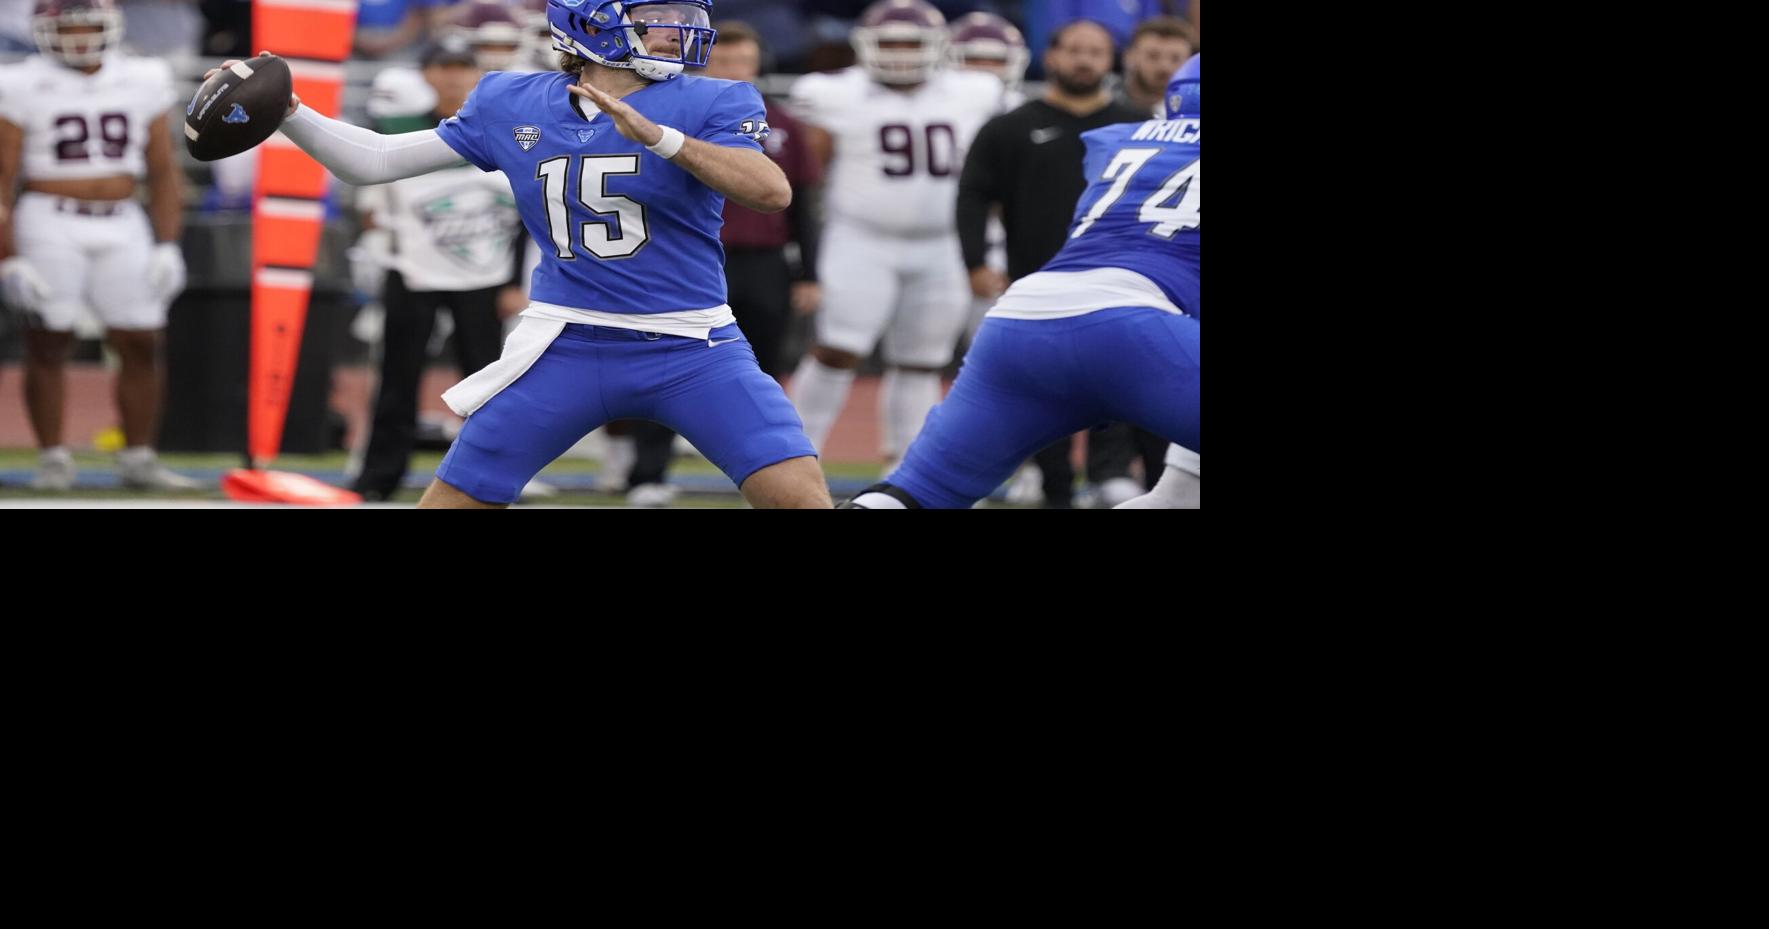 UB football quick scout: Central Michigan coach Jim McElwain on Shaun ...